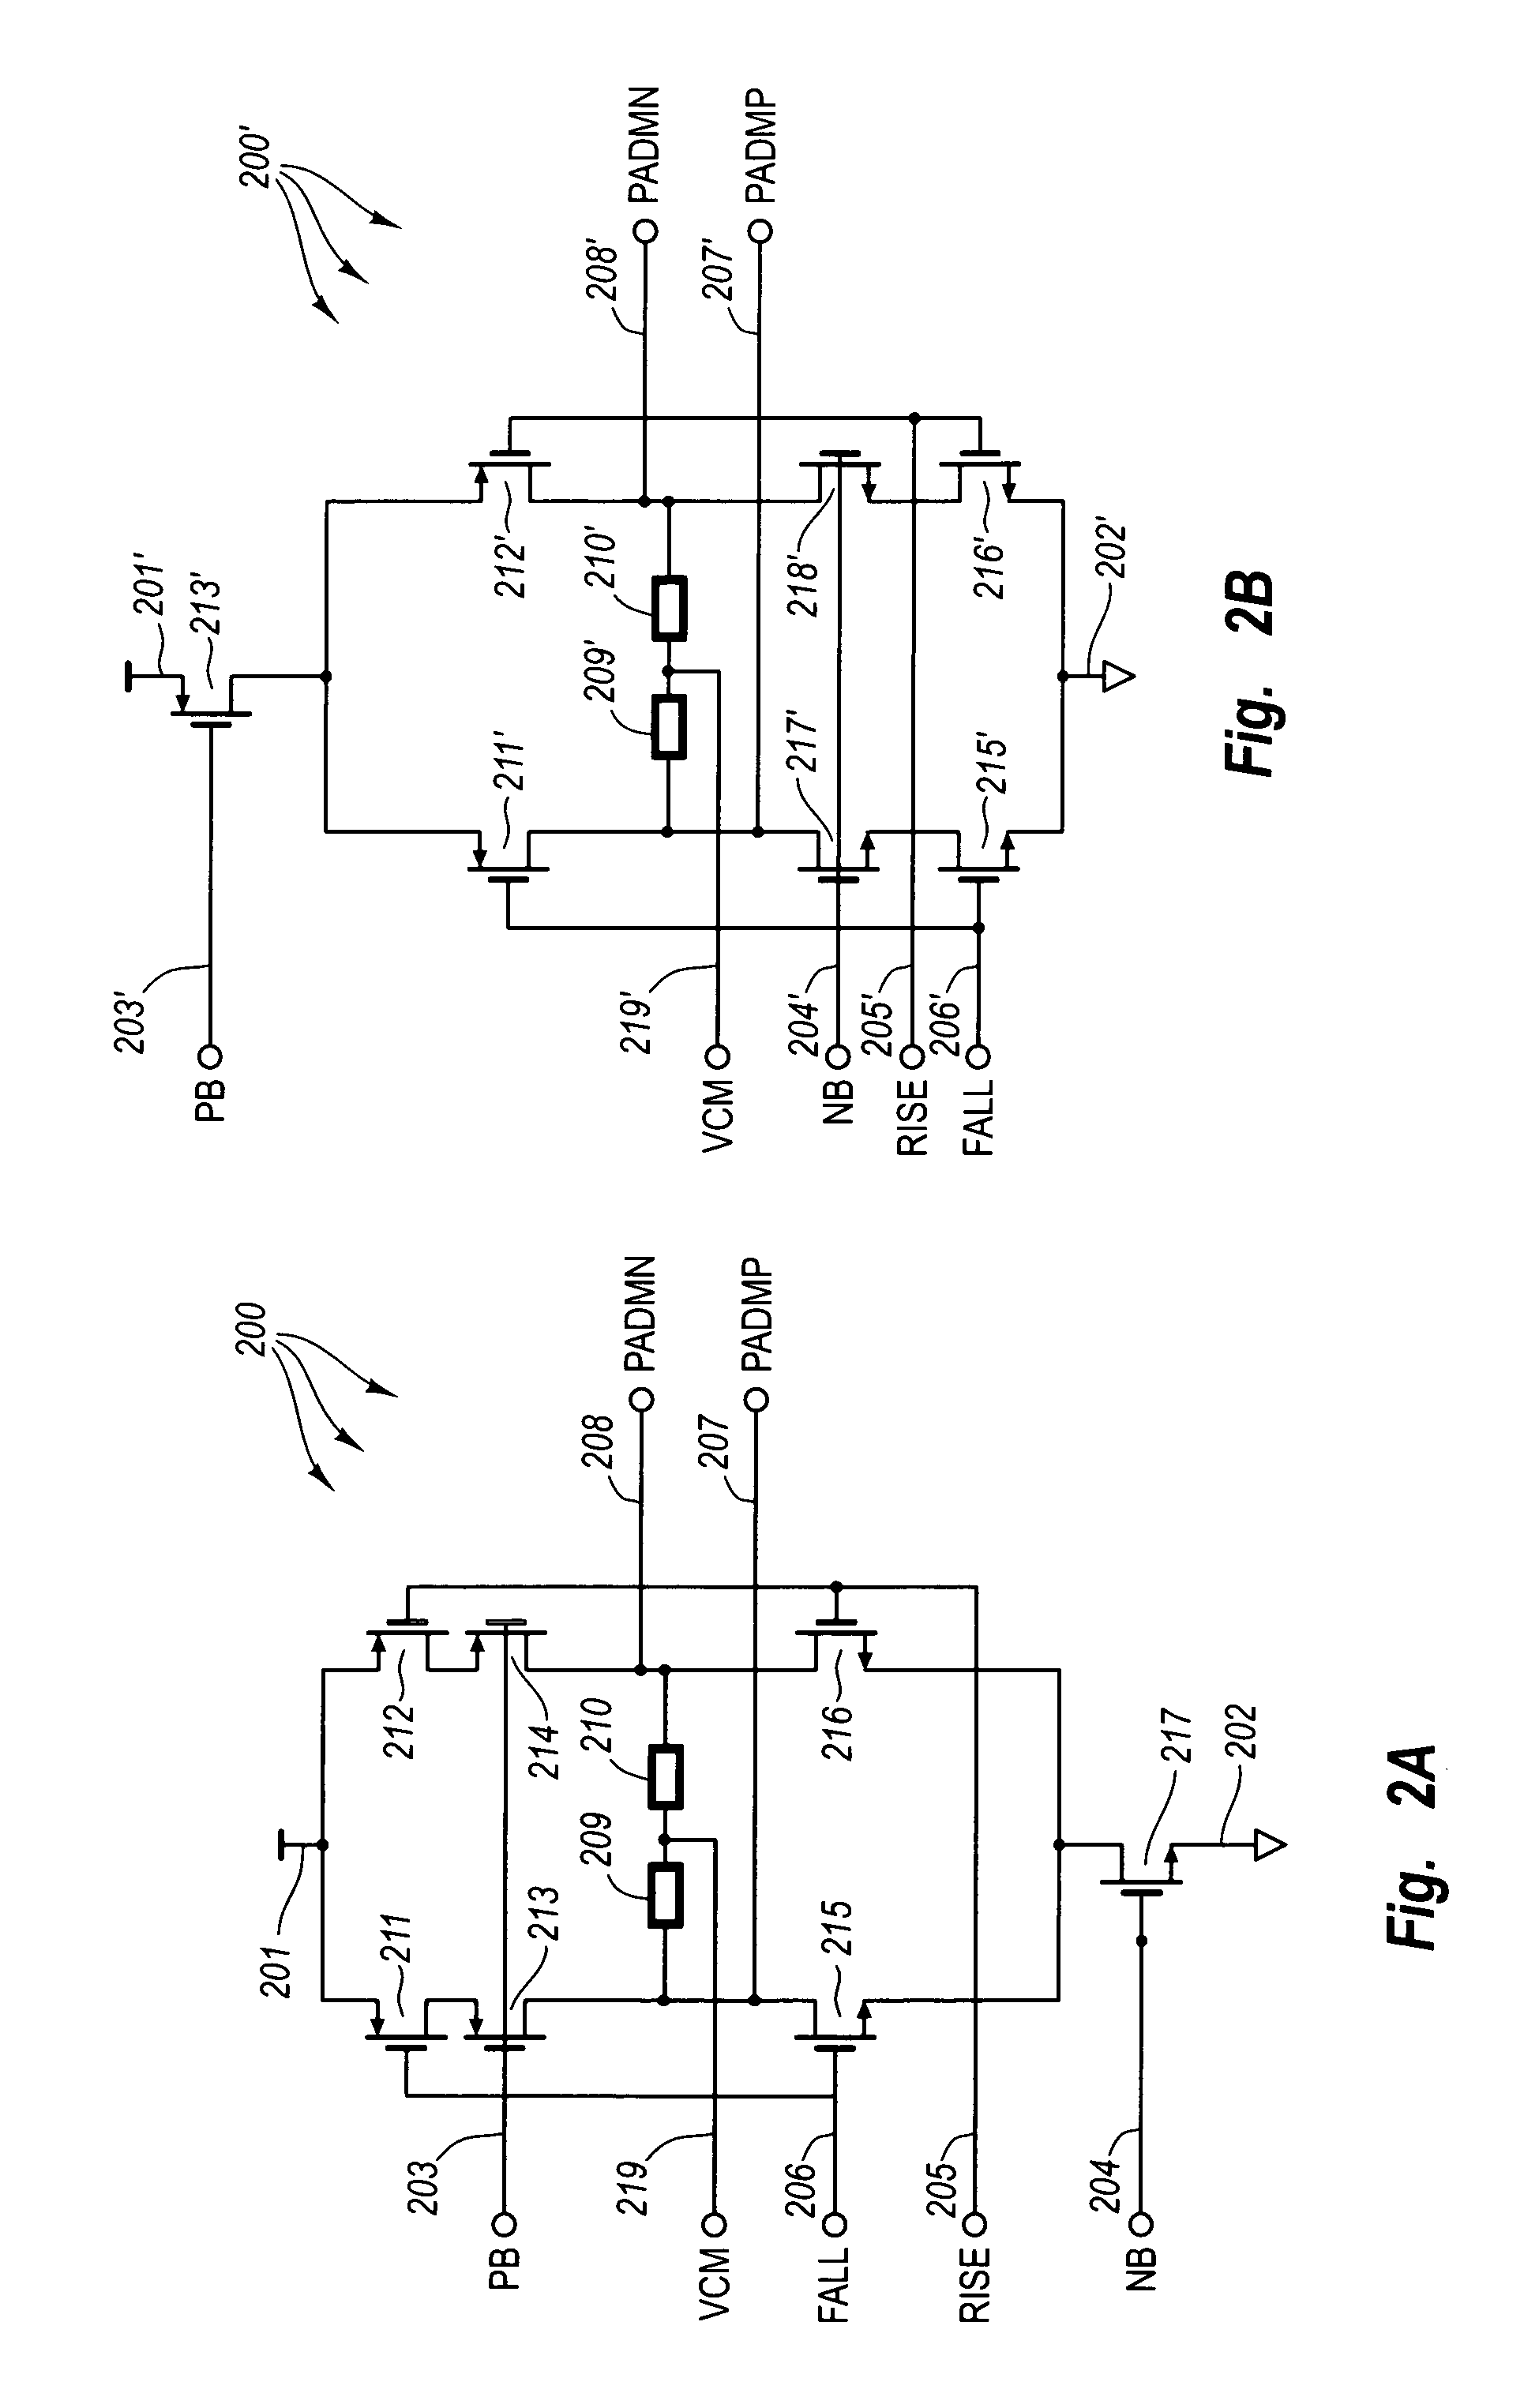 Low-voltage differential signal (LVDS) transmitter with high signal integrity